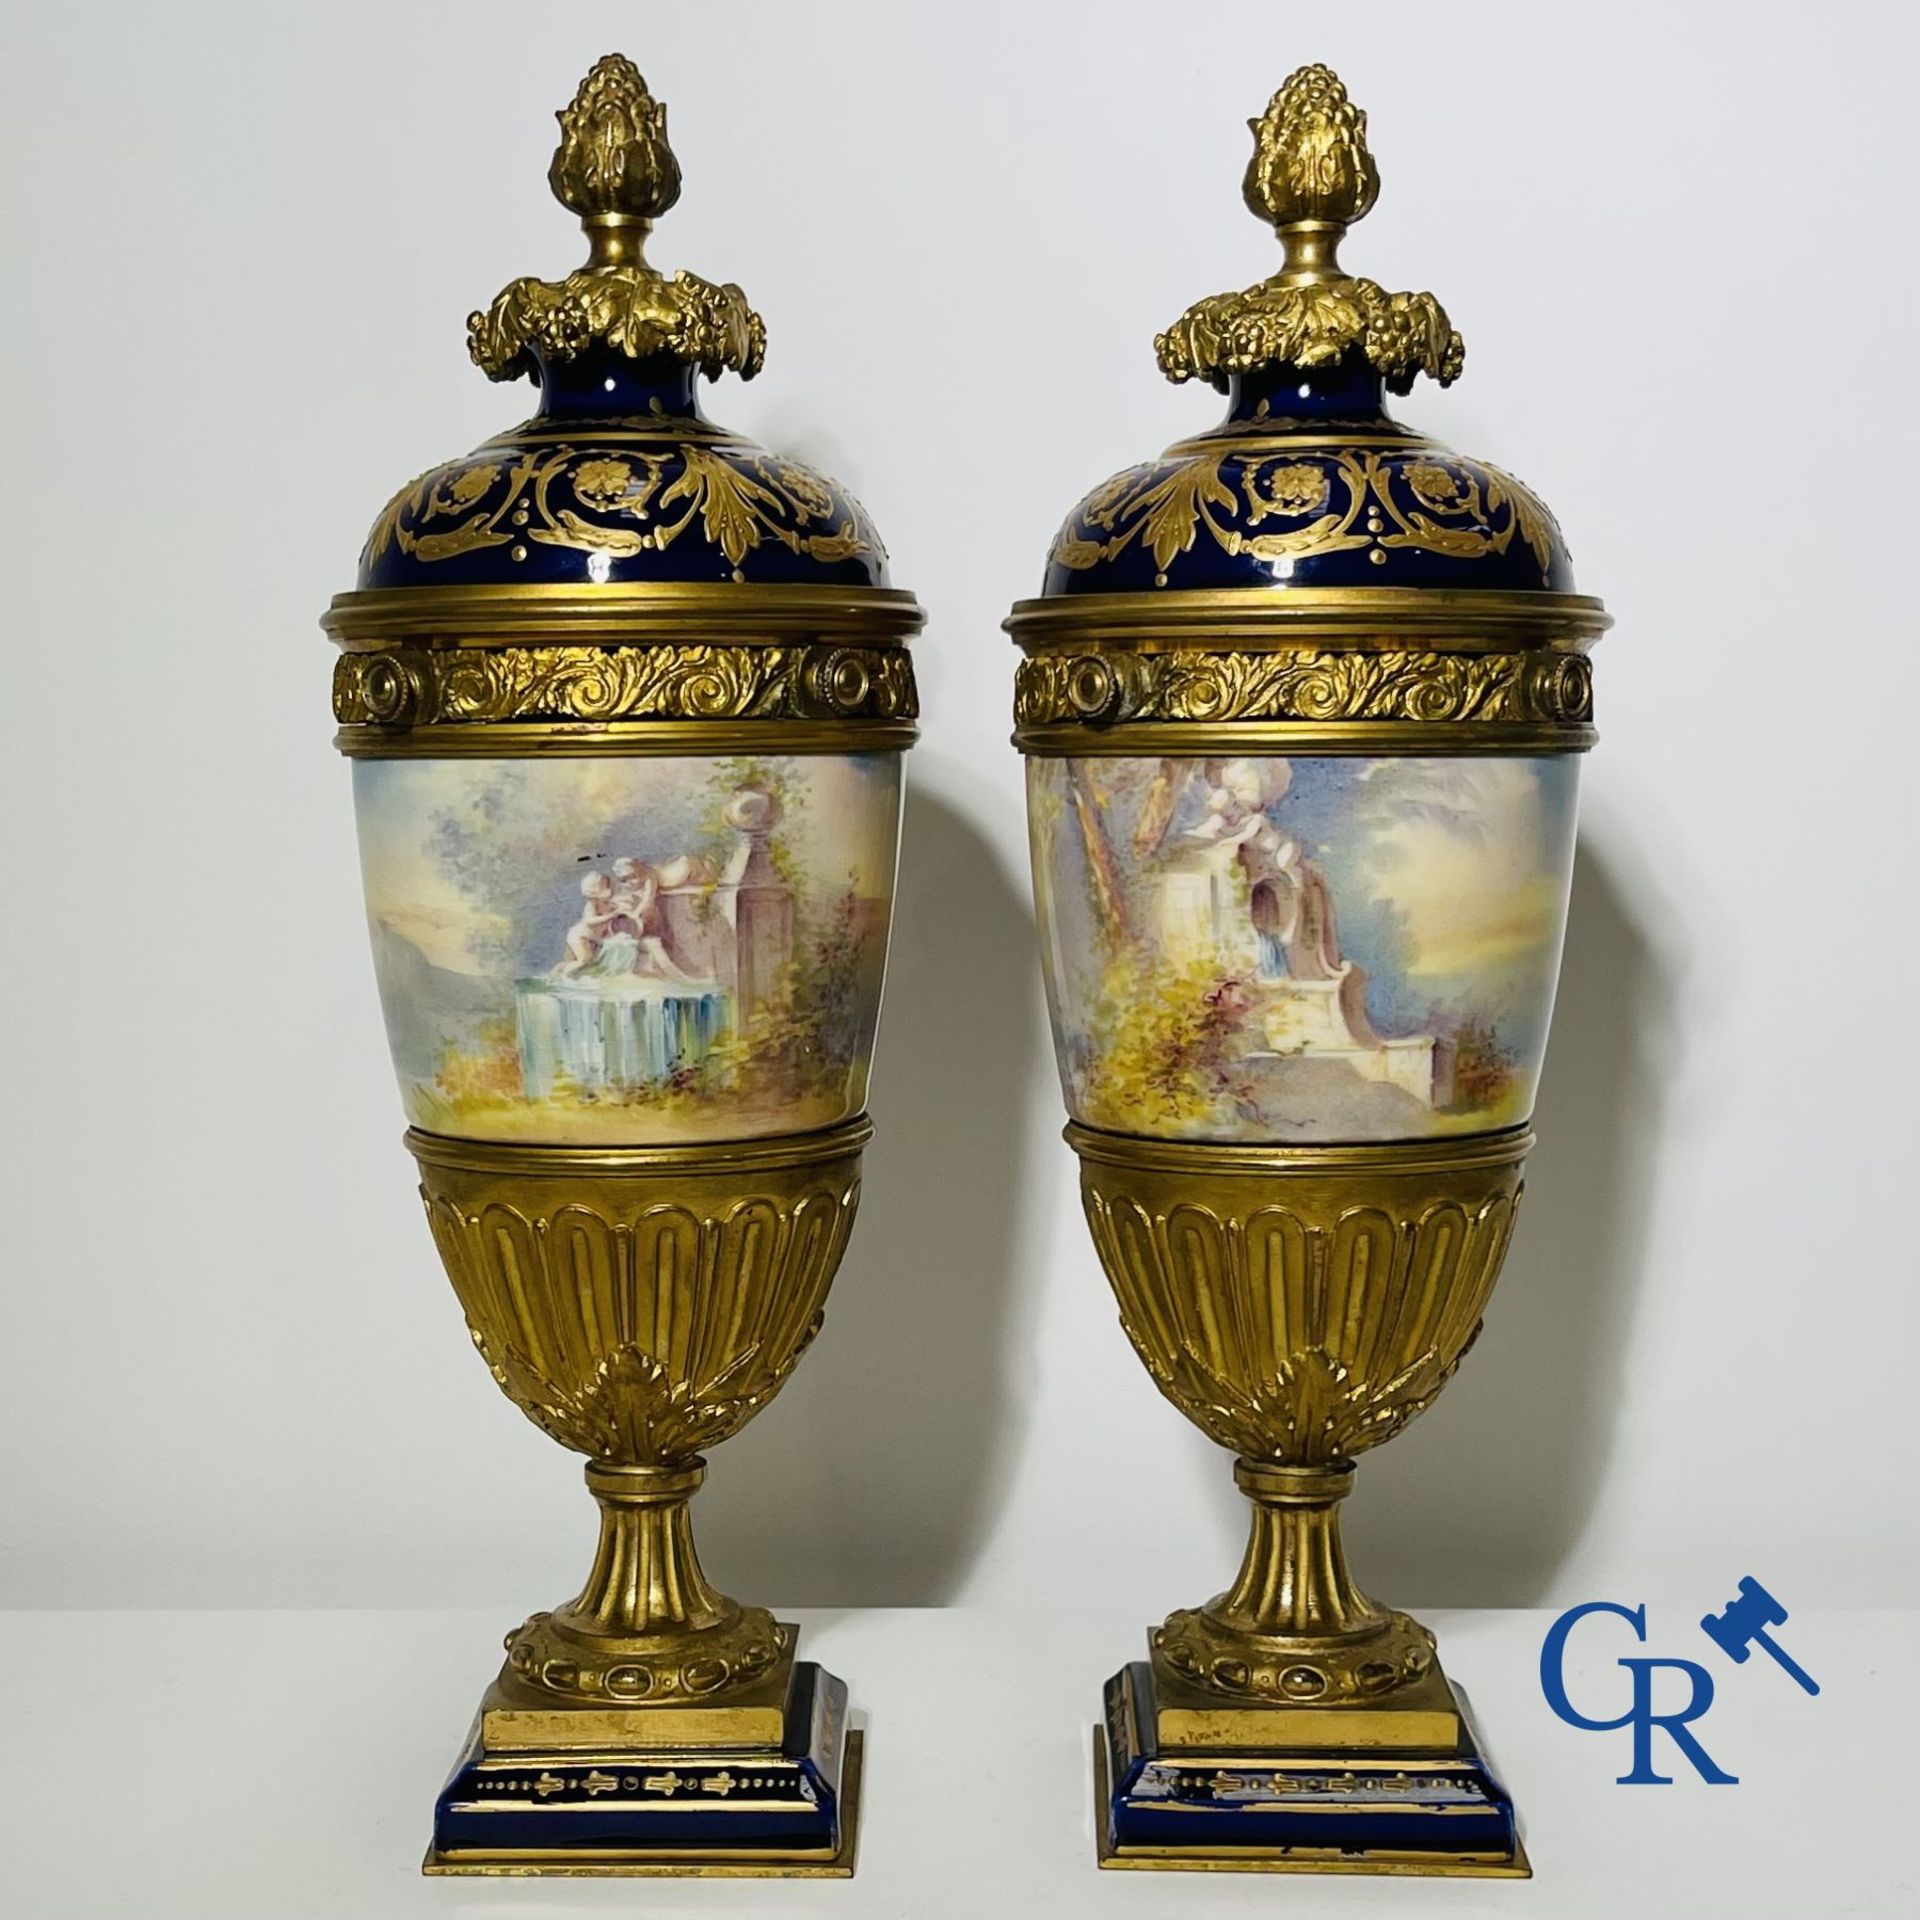 Porcelain: Sèvres: Pair of bronze mounted vases in Sèvres porcelain. Napoleon III period. - Image 2 of 6